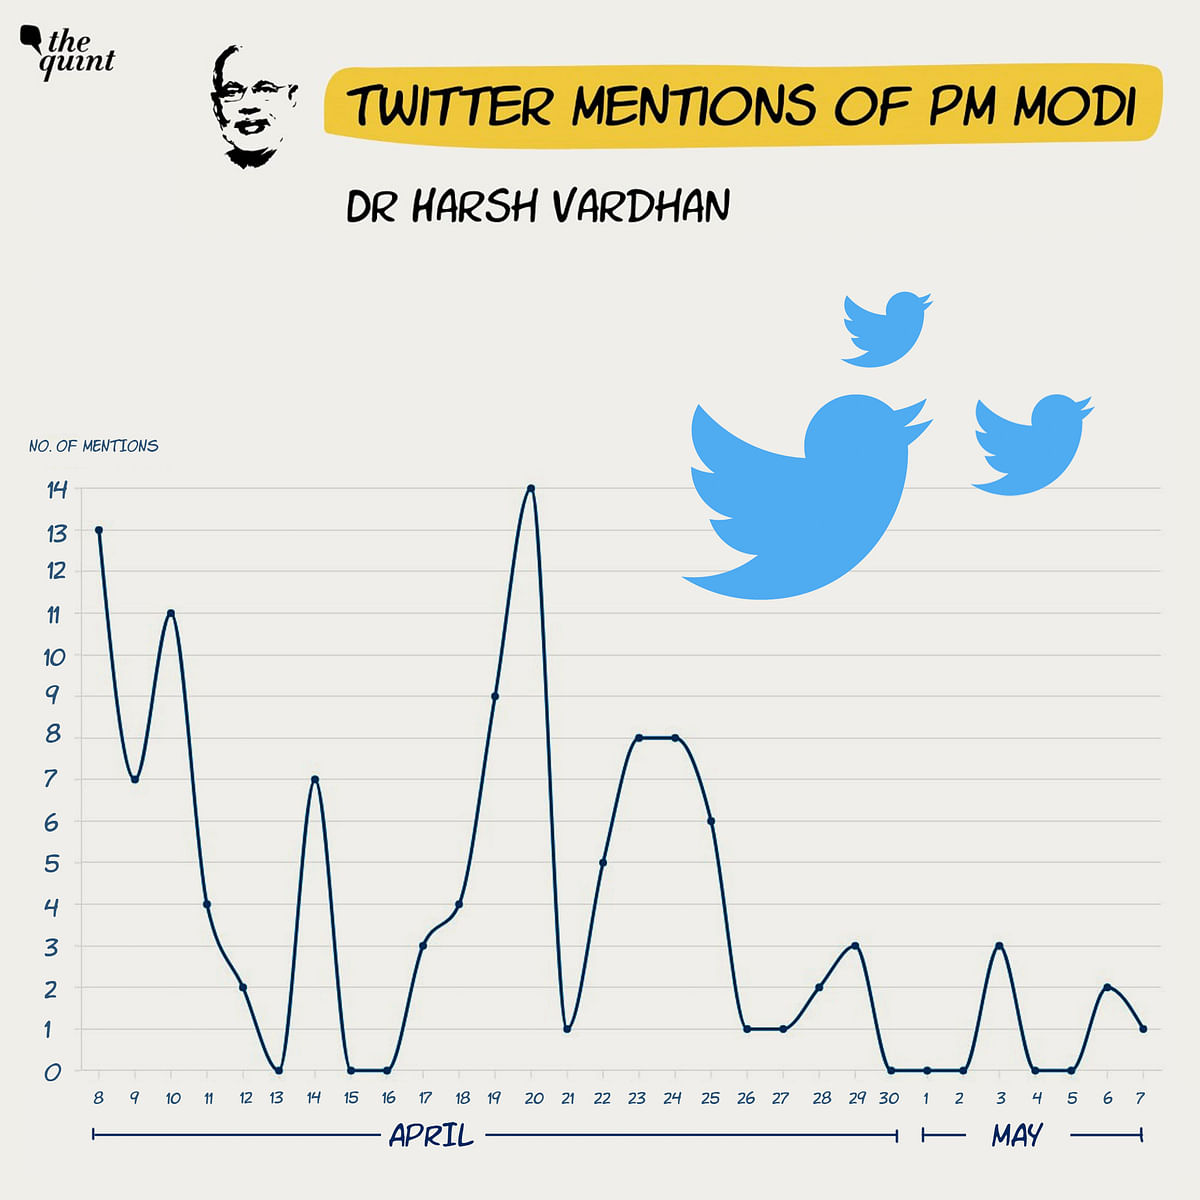 One of the conduits through which PM Modi remains present and visible in the minds of citizens is Twitter.